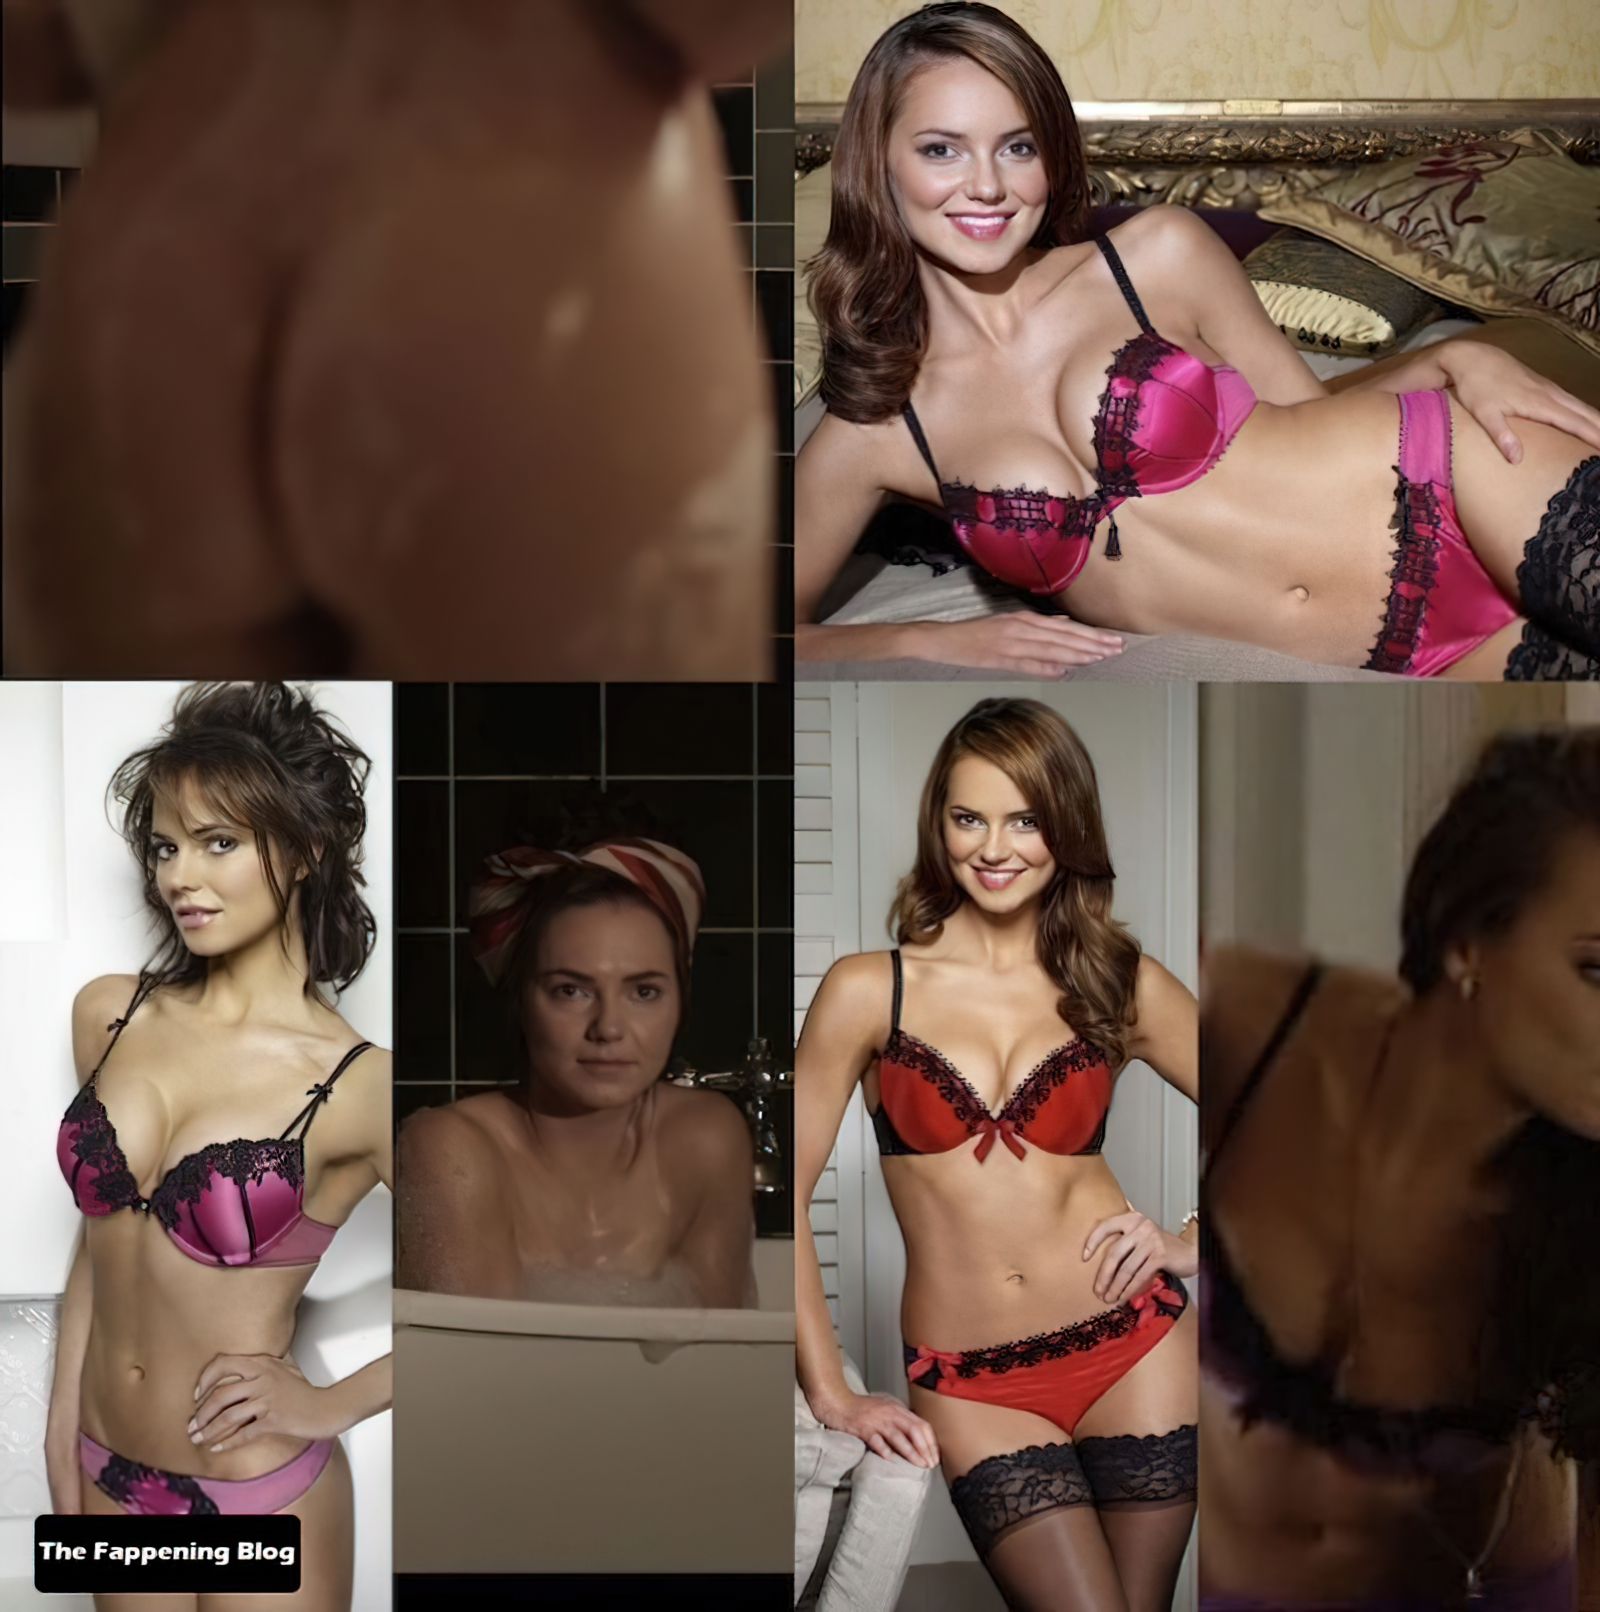 Kara Tointon Nude Sexy (44 Pics) - EverydayCum💦 & The Fappening ❤️...